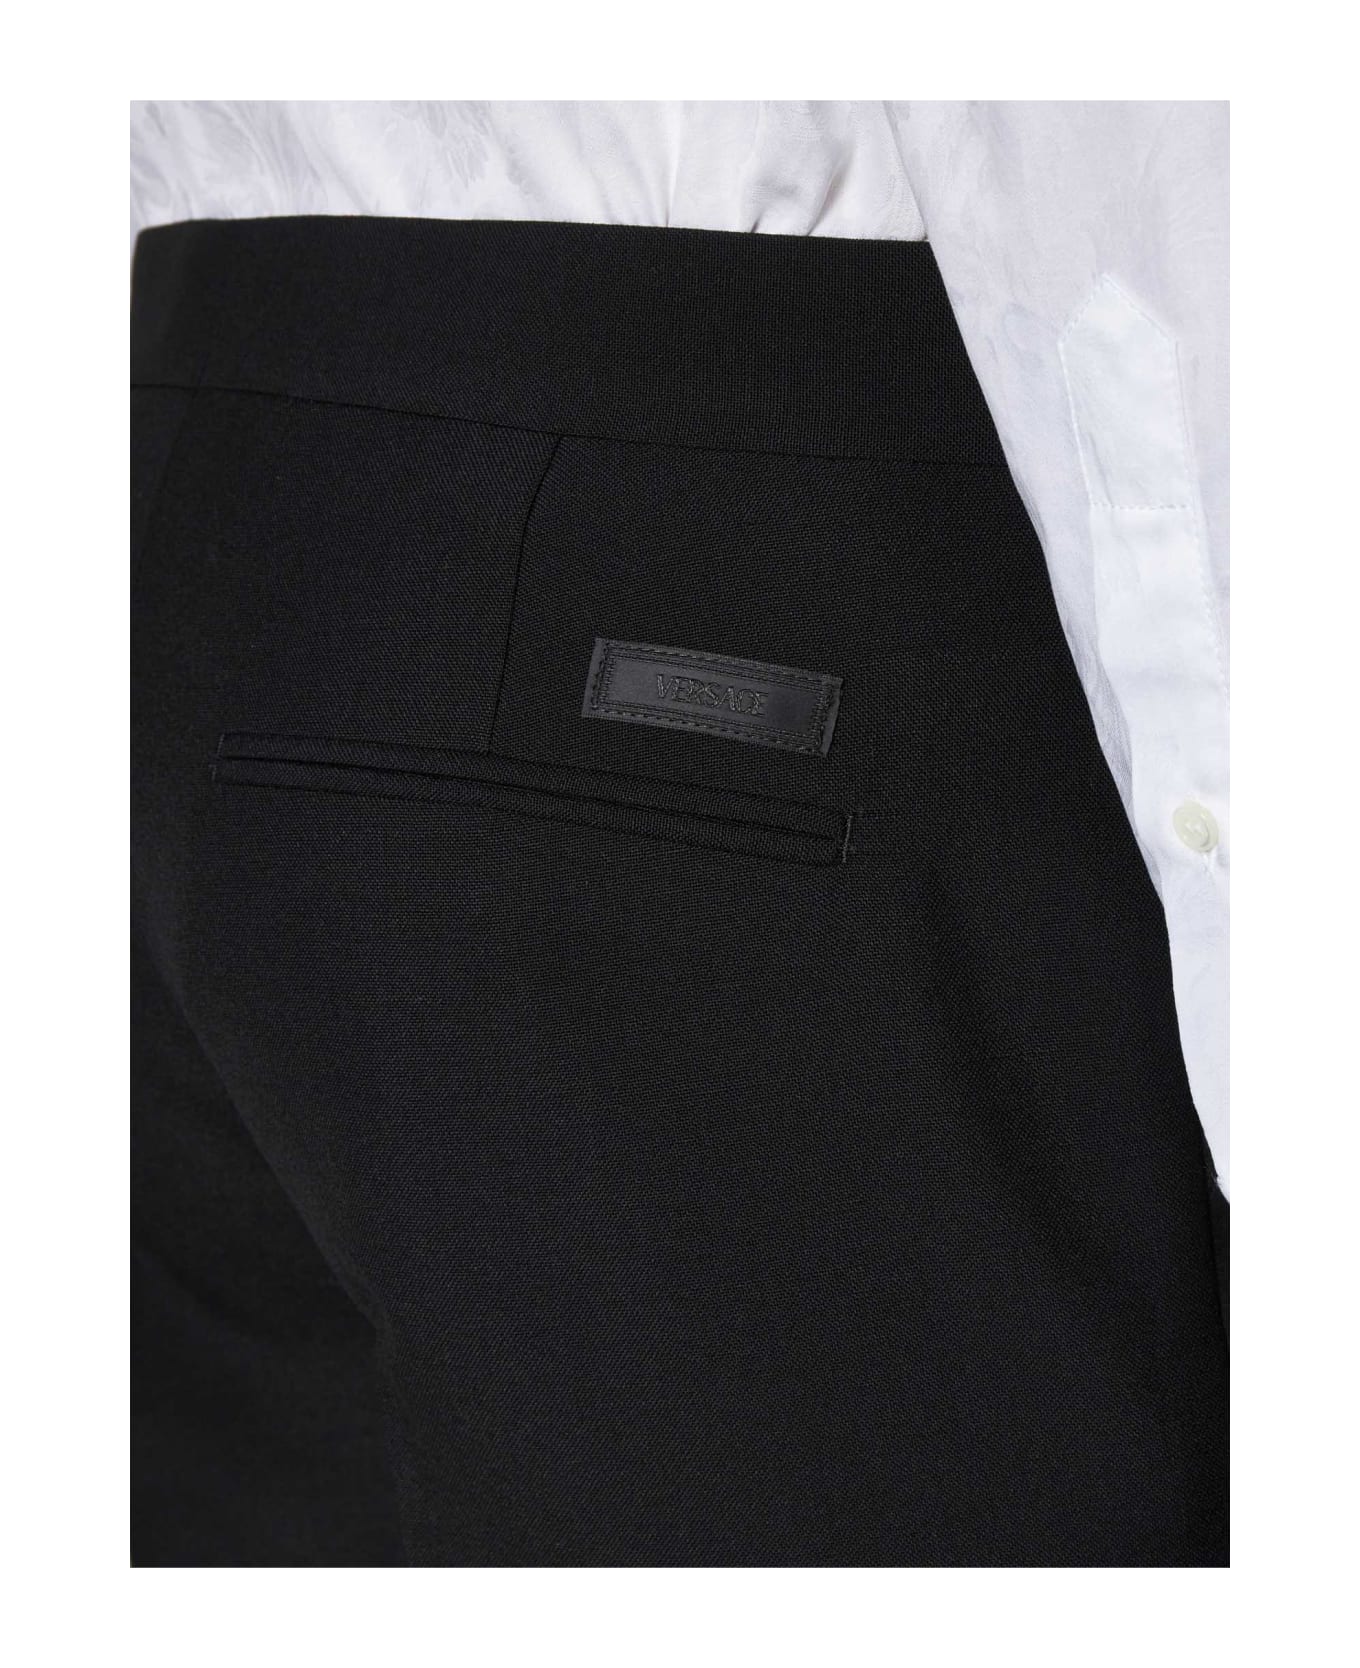 Versace trousers grigio With Silk Details - Black